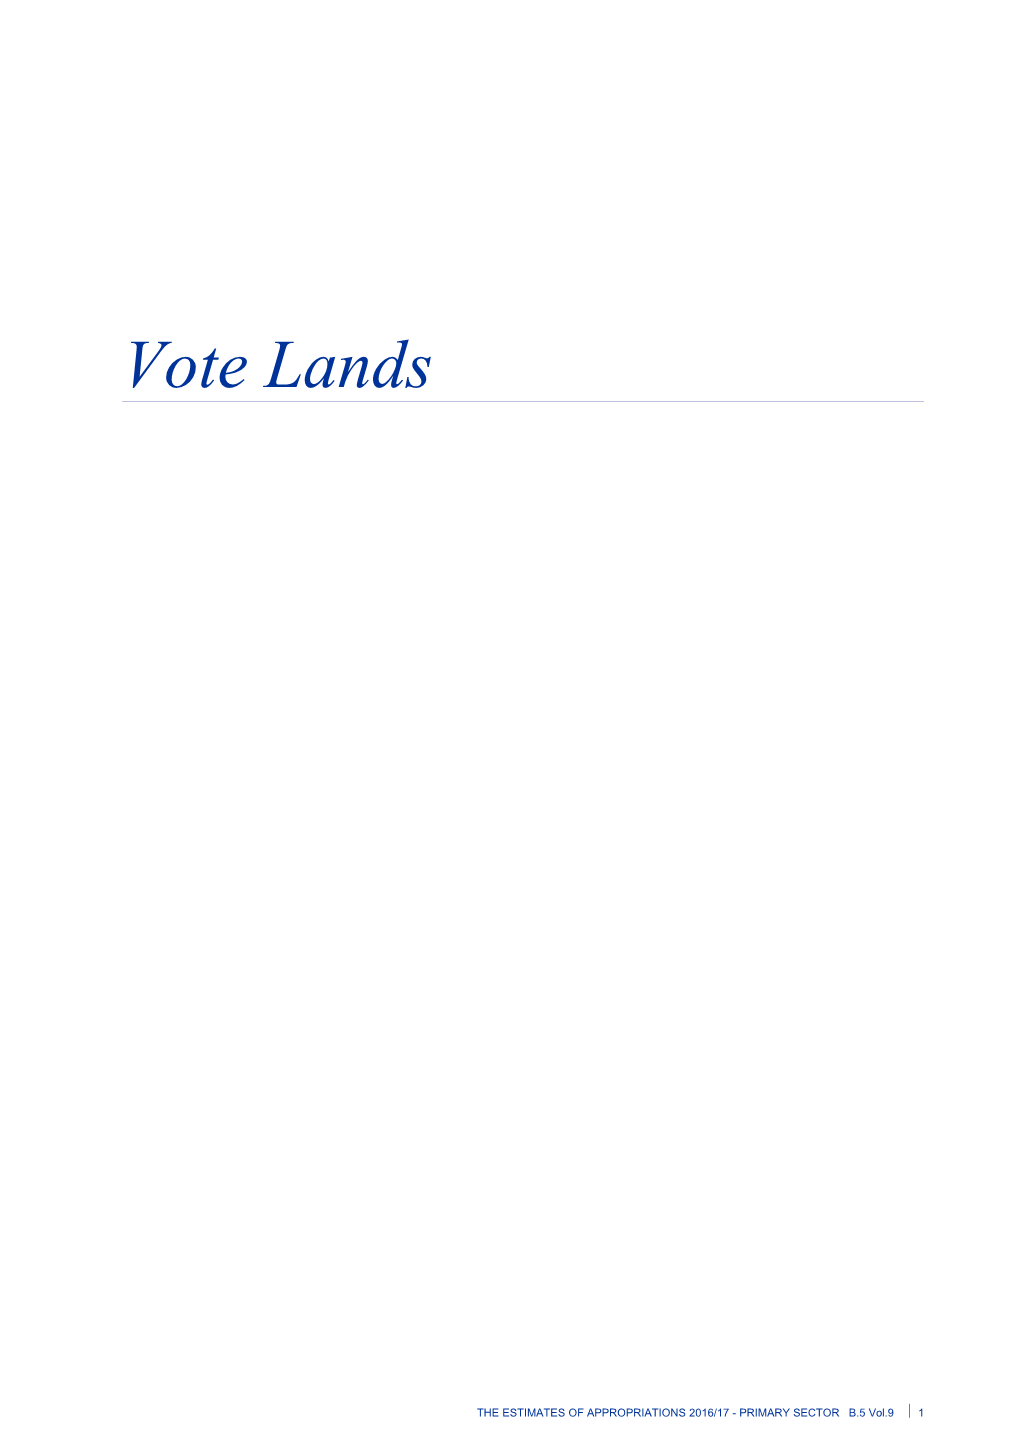 Vote Lands - Vol 9 Primary Sector - the Estimates of Appropriations 2016/17 - Budget 2016